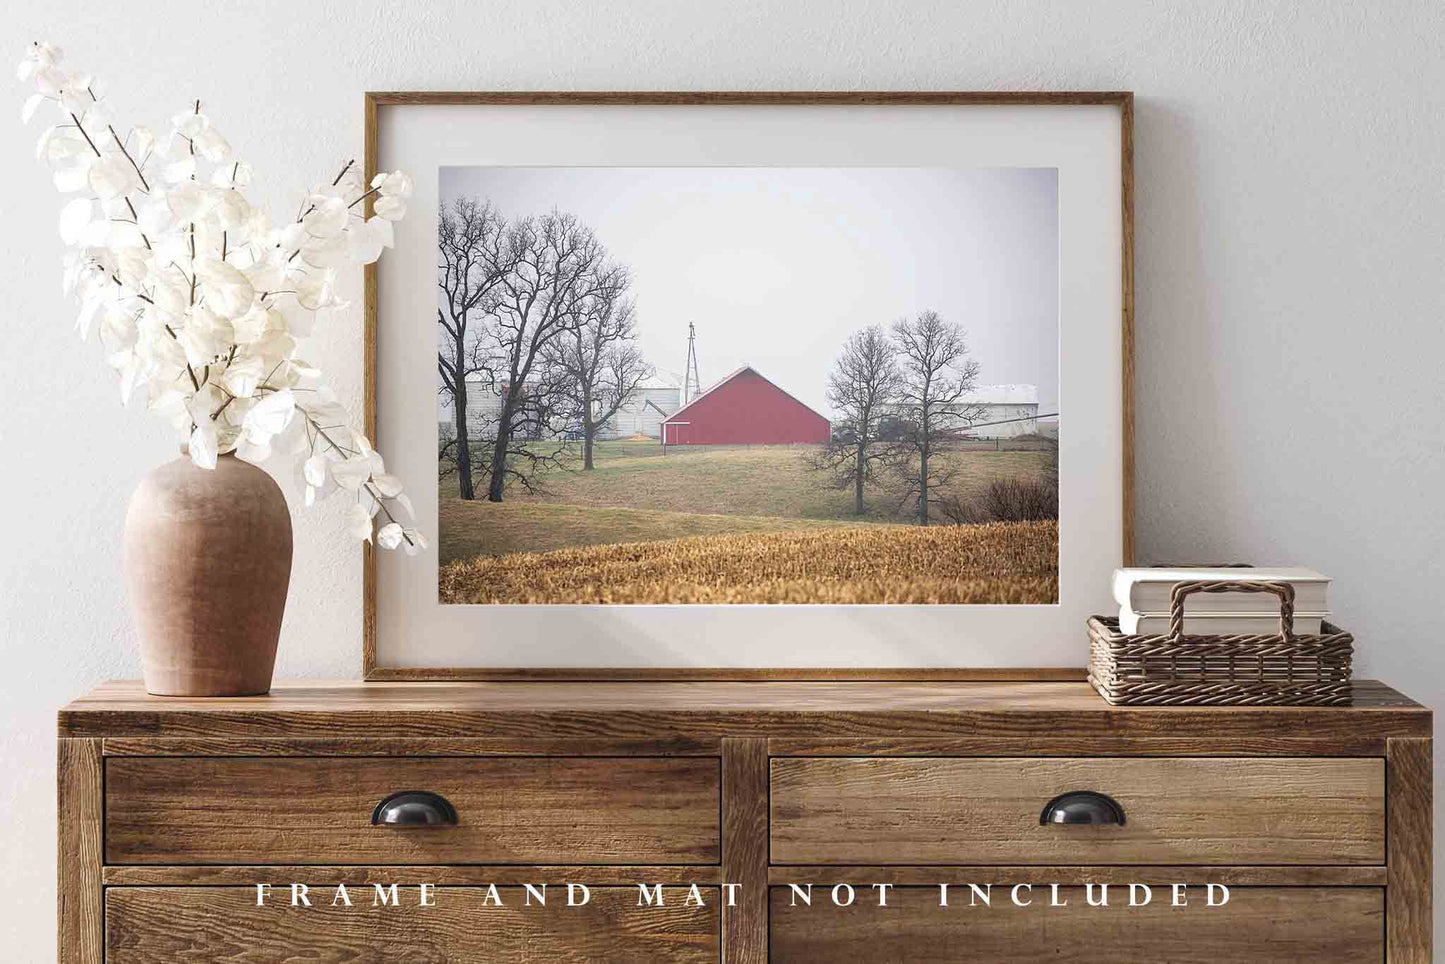 Farm Photography Print - Picture of Red Barn on Foggy Morning in Illinois - Country Wall Art Midwestern Photo Artwork Farmhouse Decor